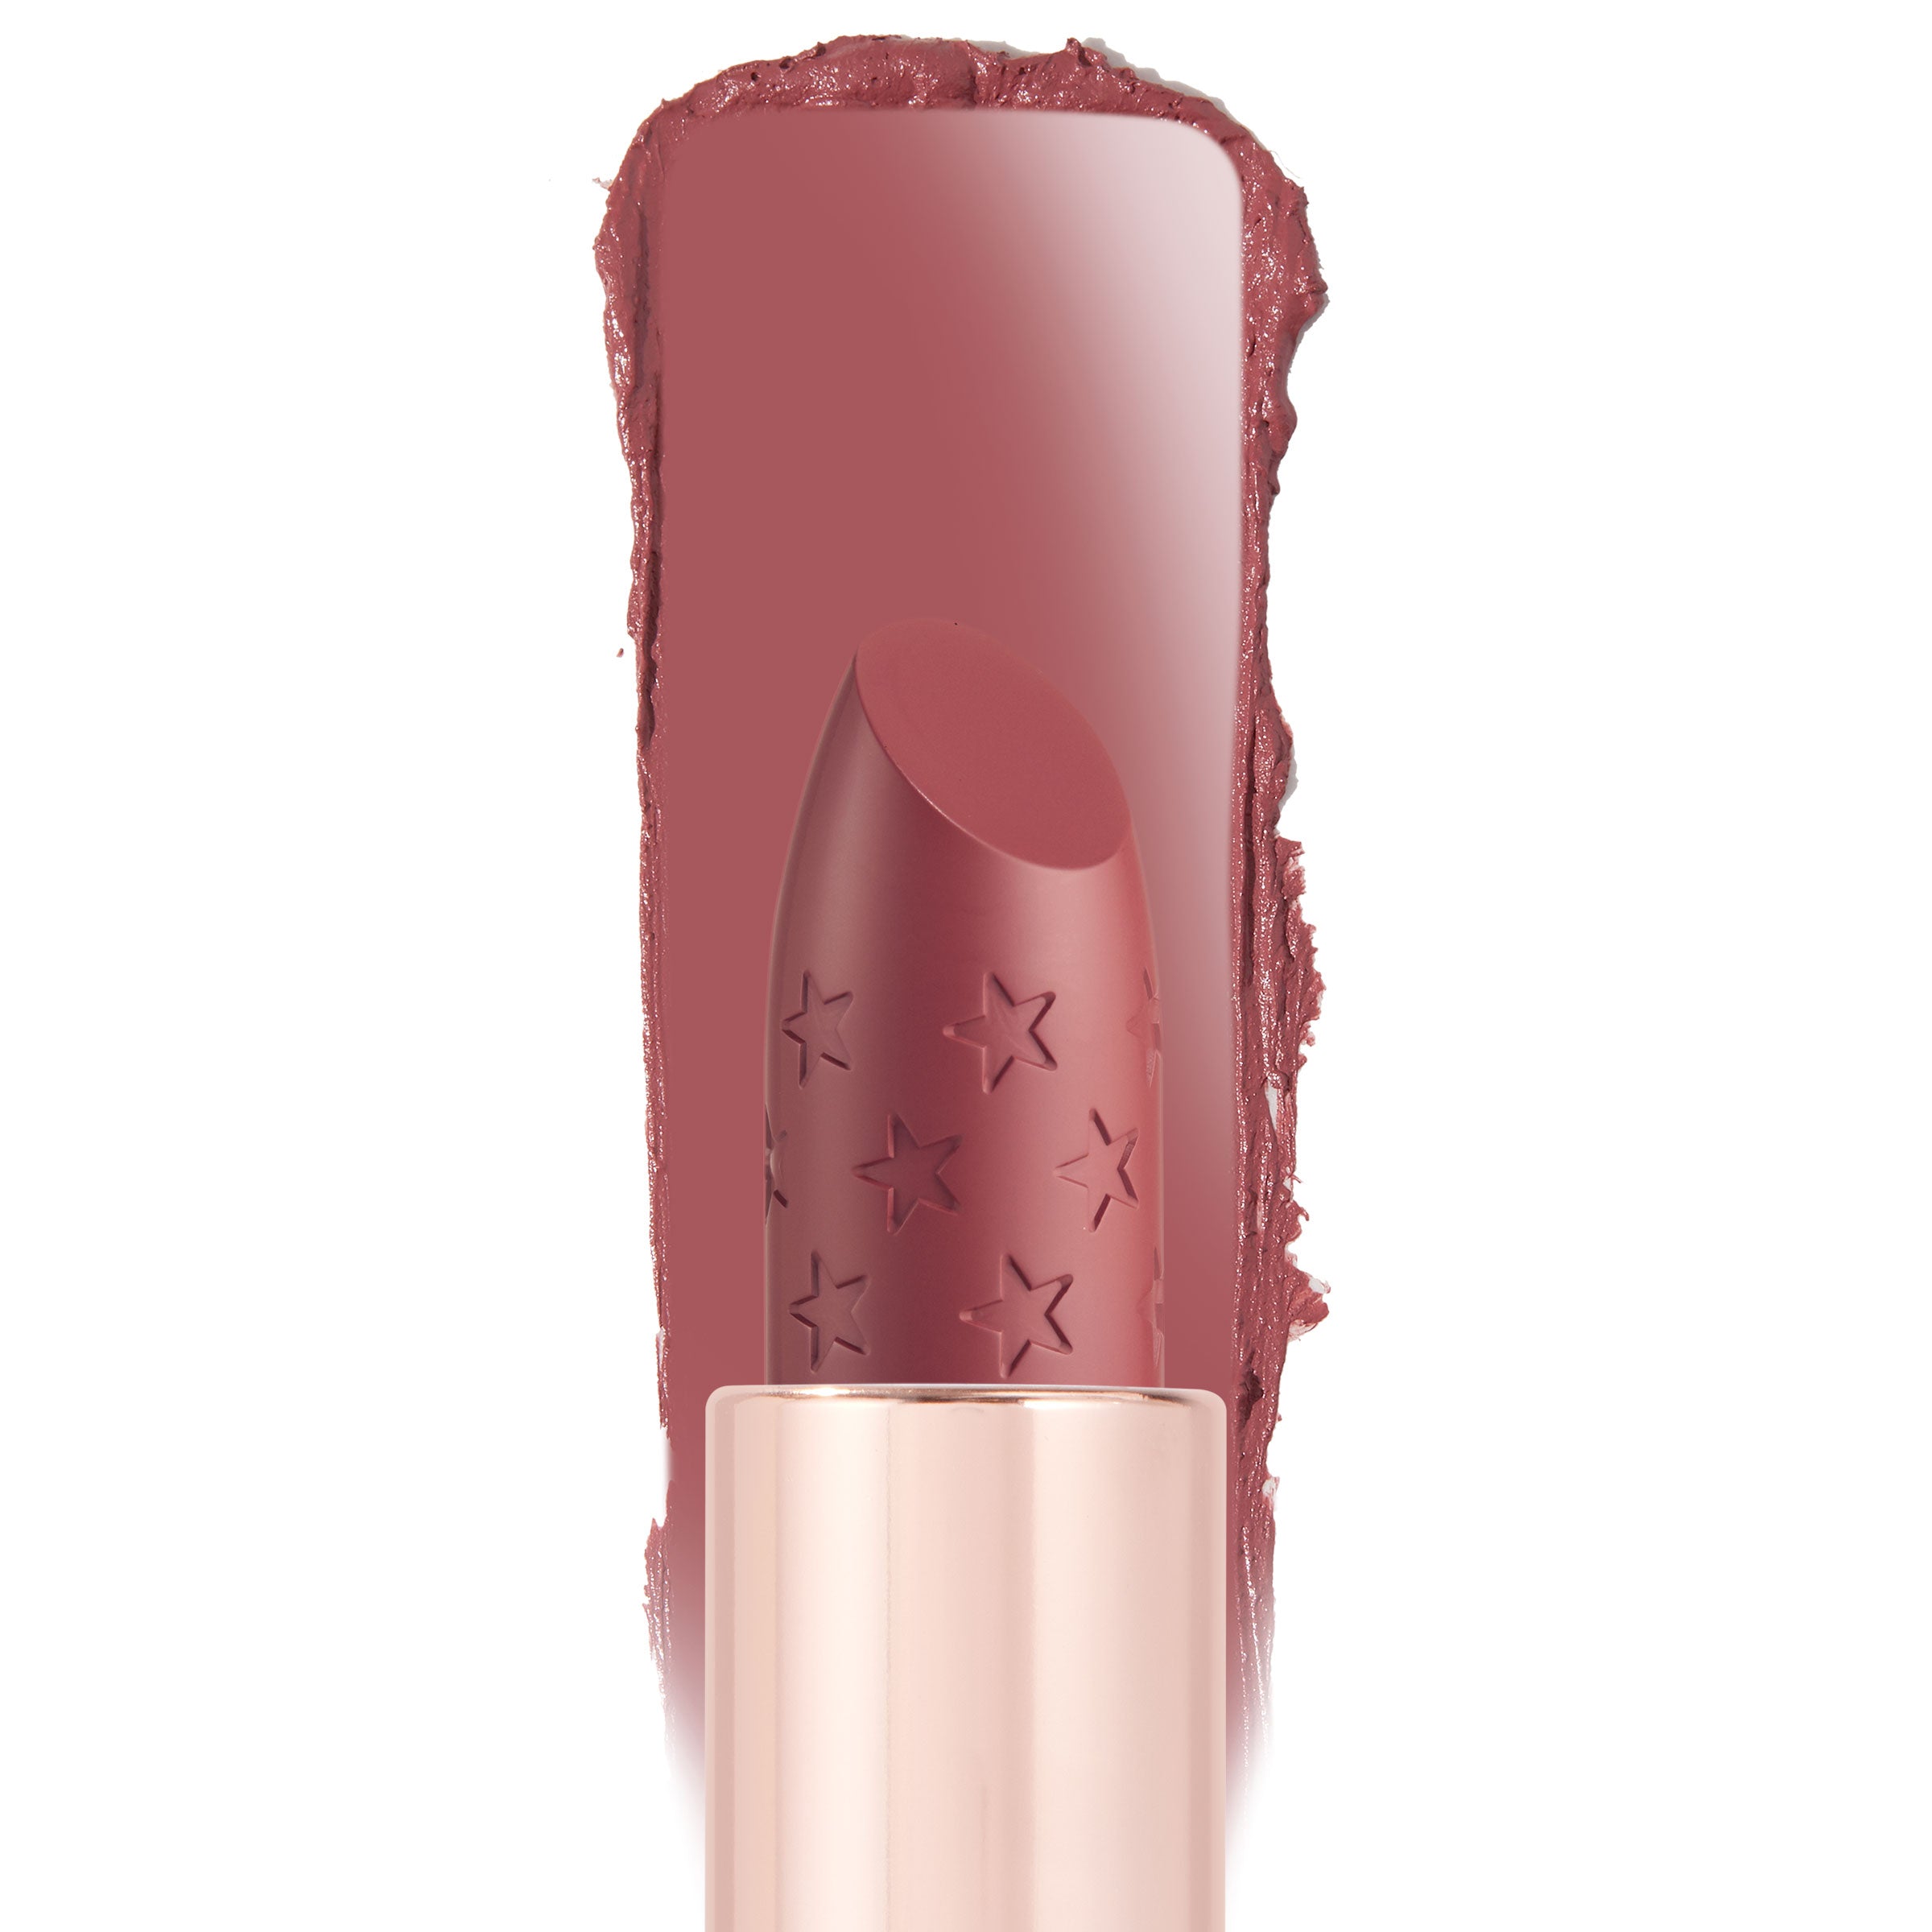 17 Fall Fresh Lipsticks Worthy Of Your Obsession